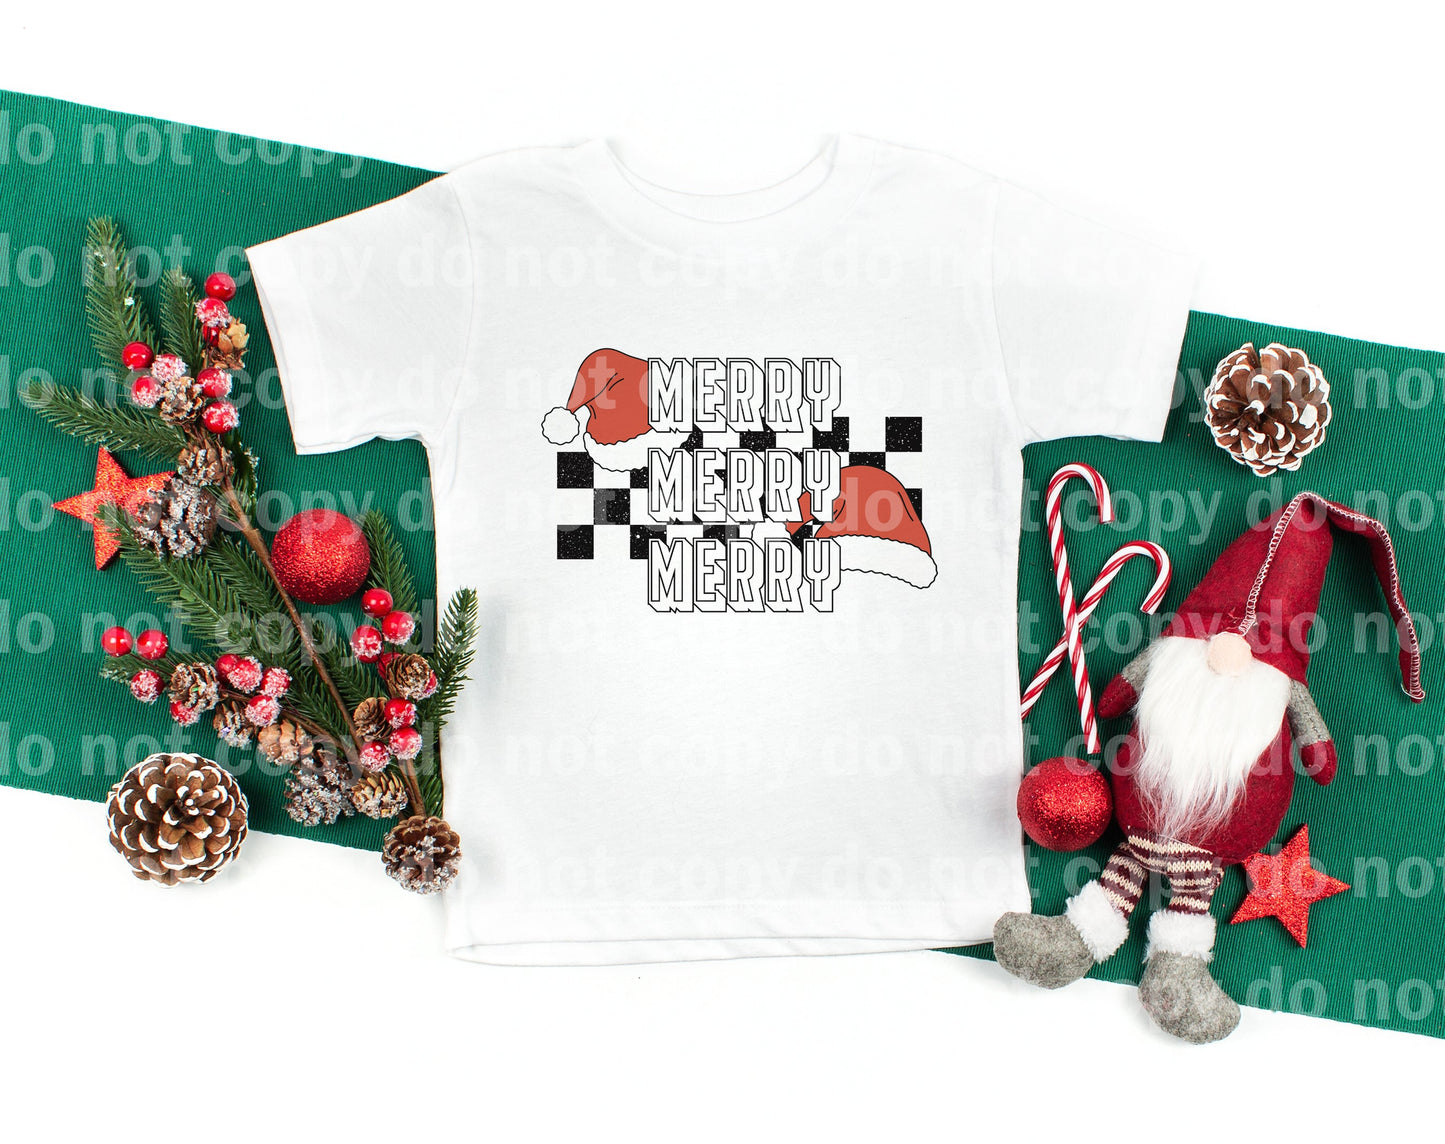 Merry Merry Merry Plaid Dream Print or Sublimation Print